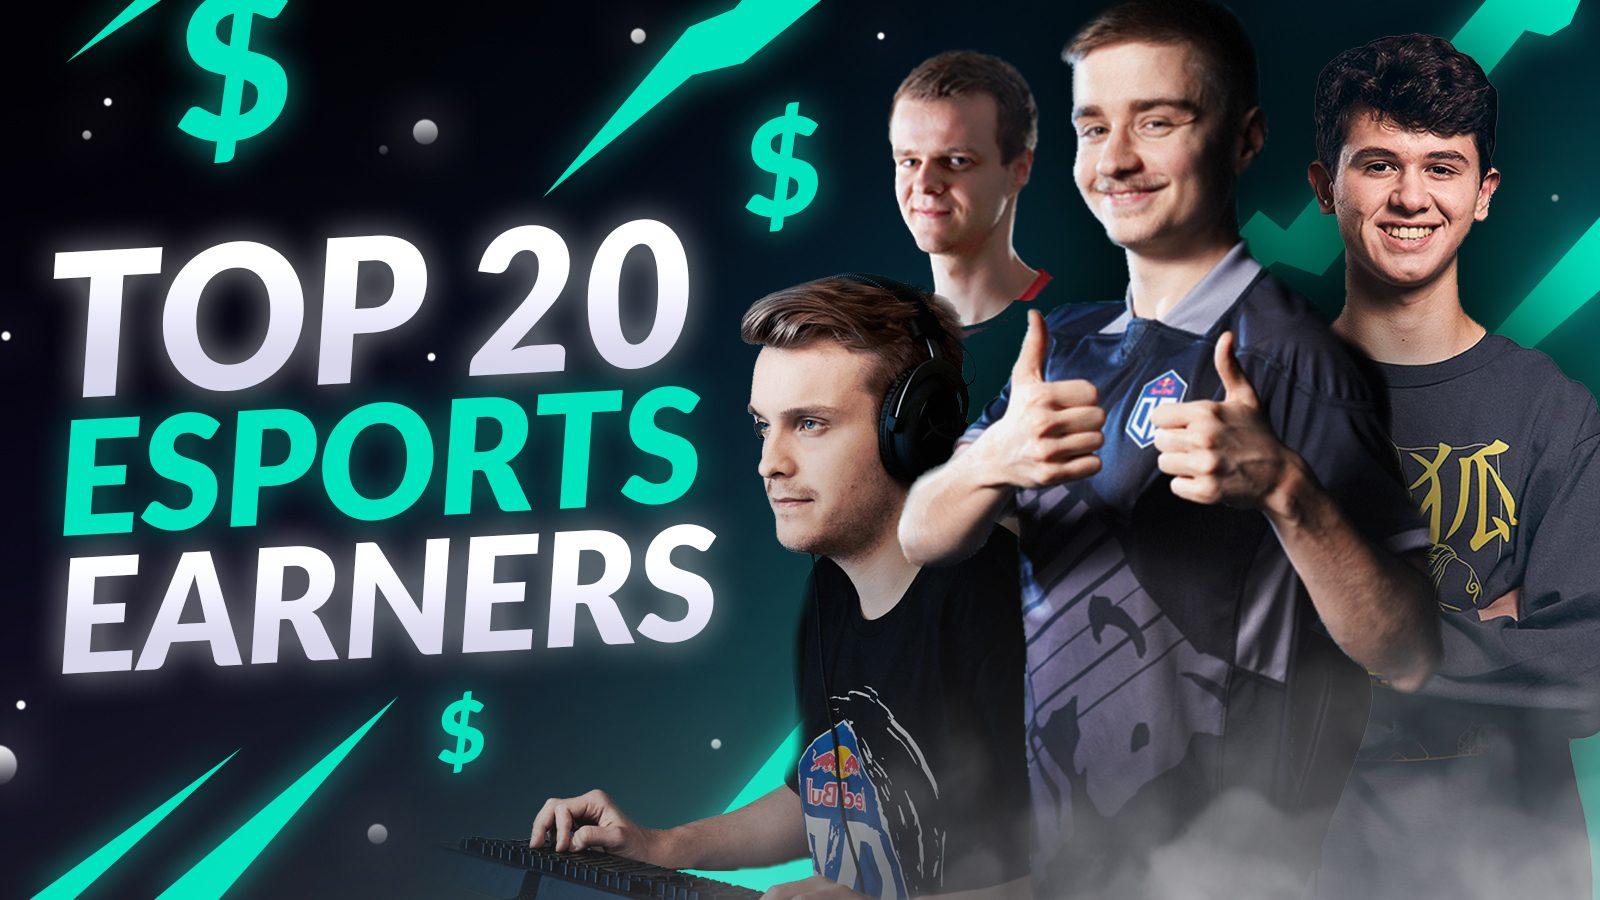 Here are the highest earning Dota 2 players of all time